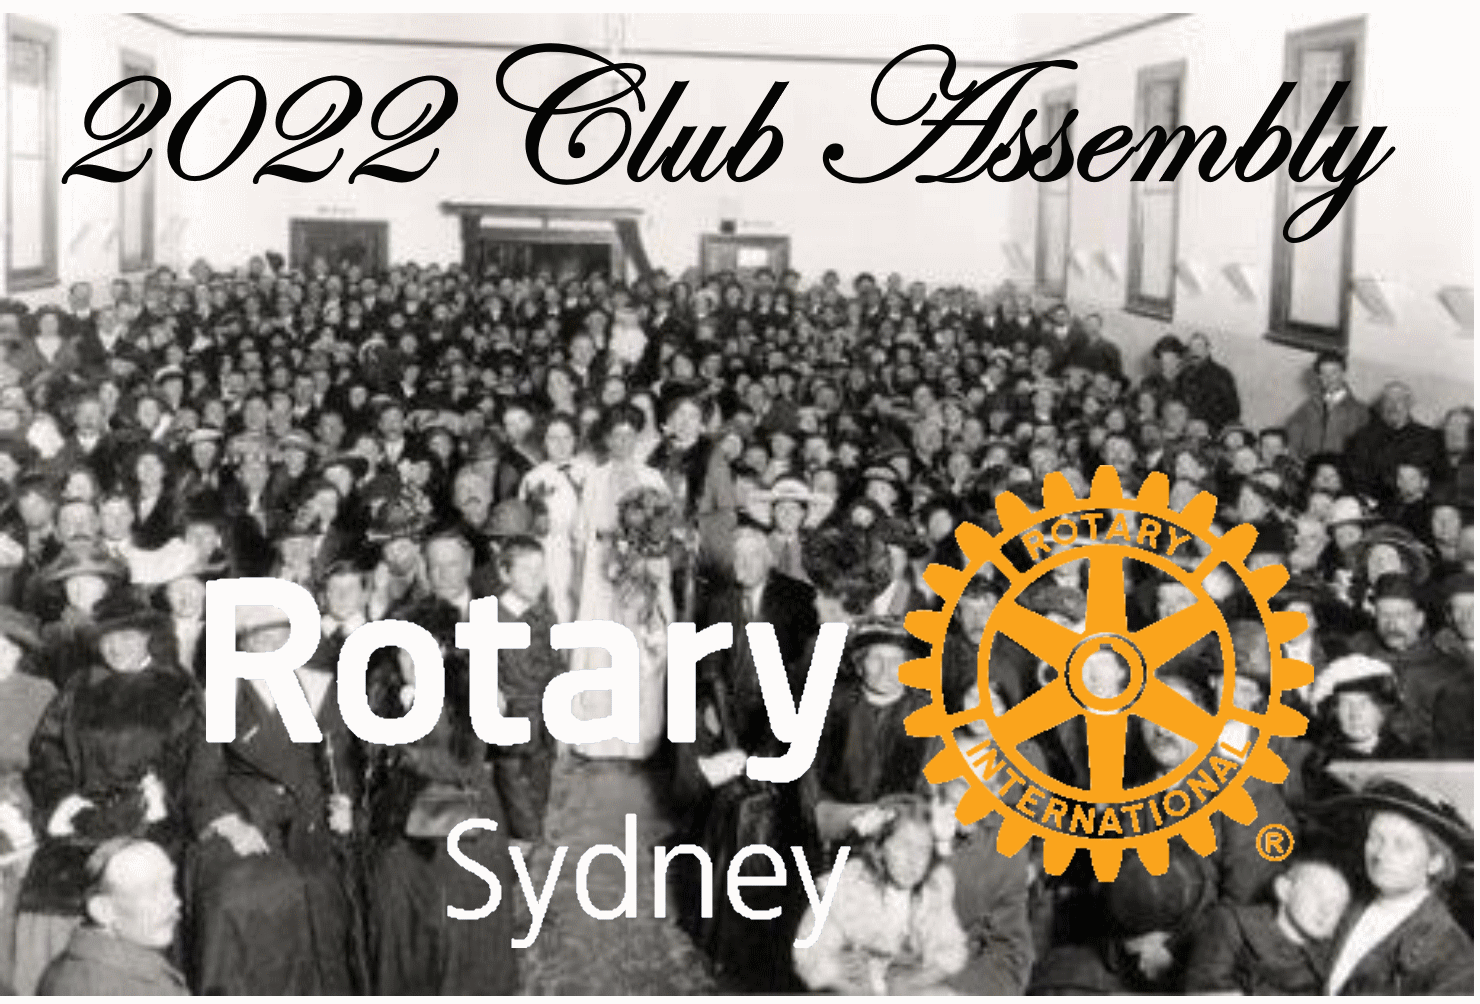 2022 Club Assembly - Face to Face Only